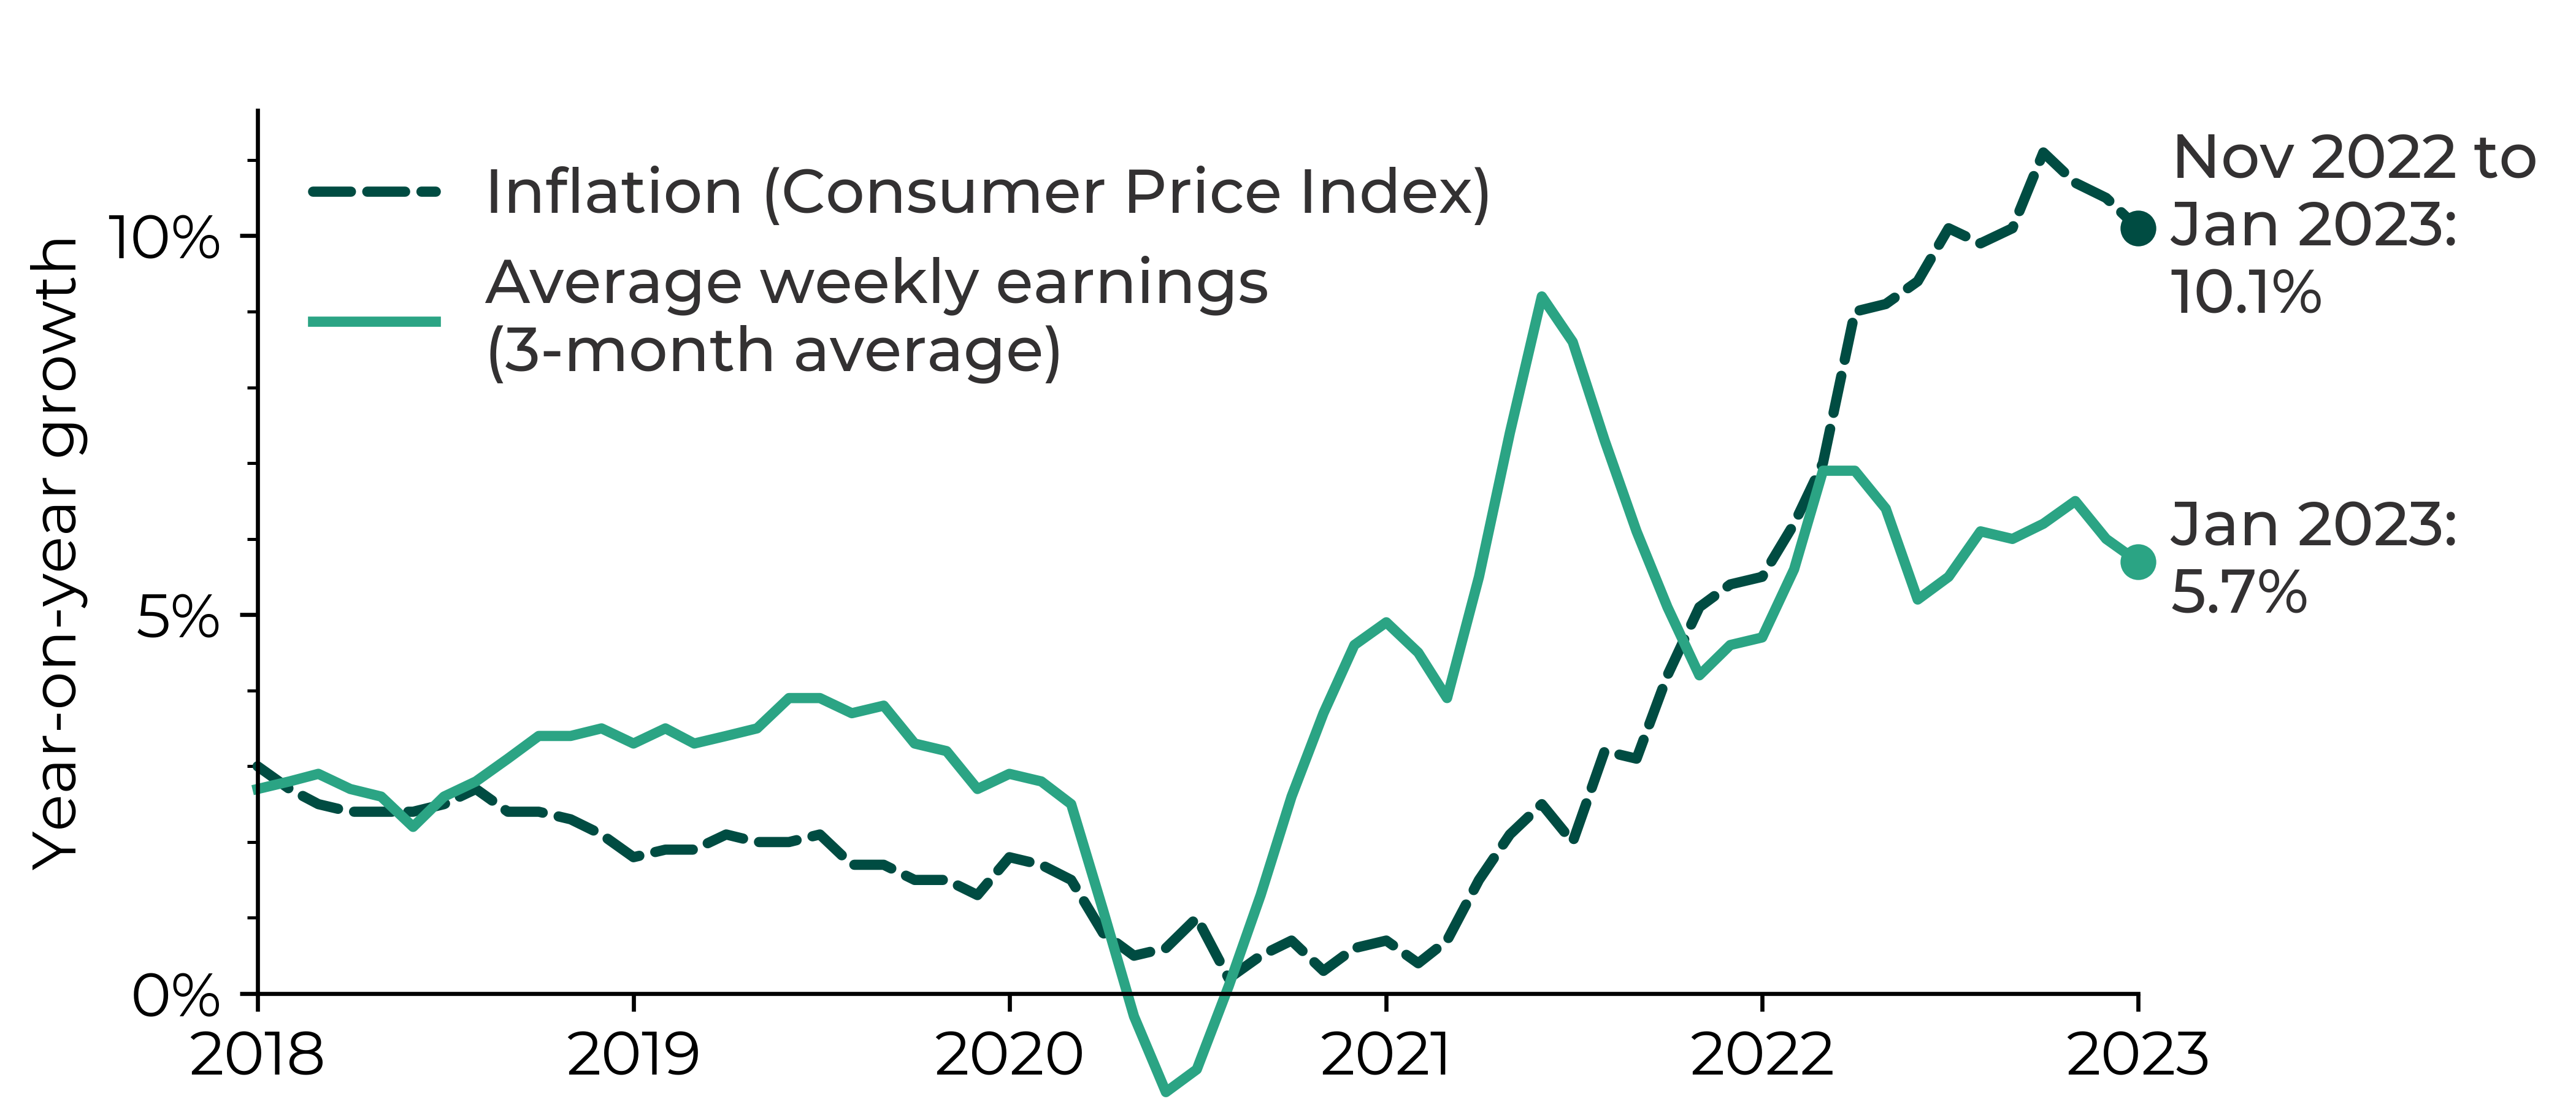 Graph showing UK inflation exceeding average weekly earnings (3-month average) in 2022-23. In January 2023, the average weekly earnings were 5.7% higher than for January 2022 whereas the Consumer Price Index inflation was at 10.1%.